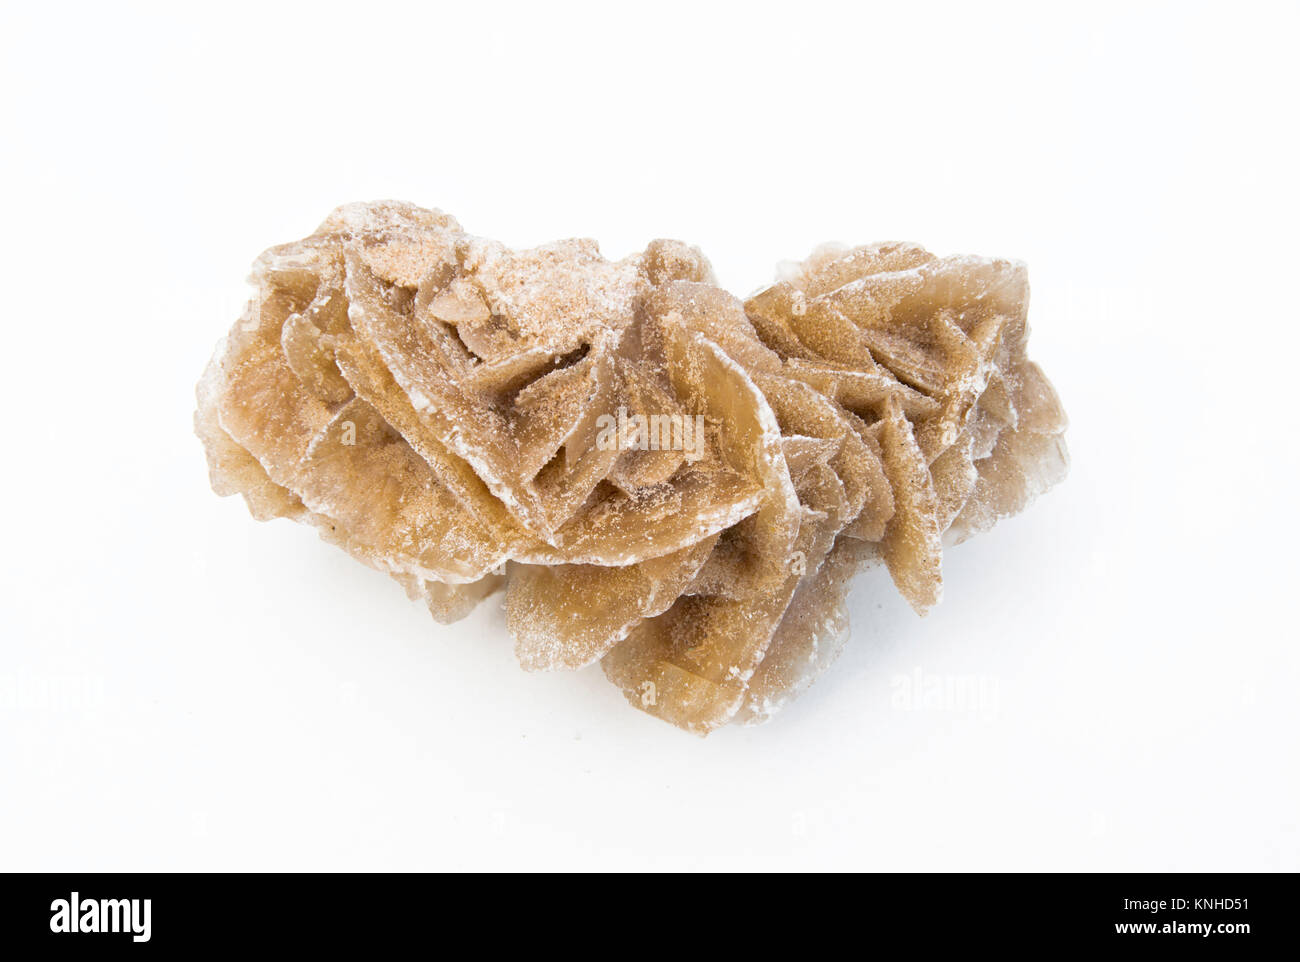 extreme close up of Desert rose gypsum mineral isolated over white background with sand grains Stock Photo